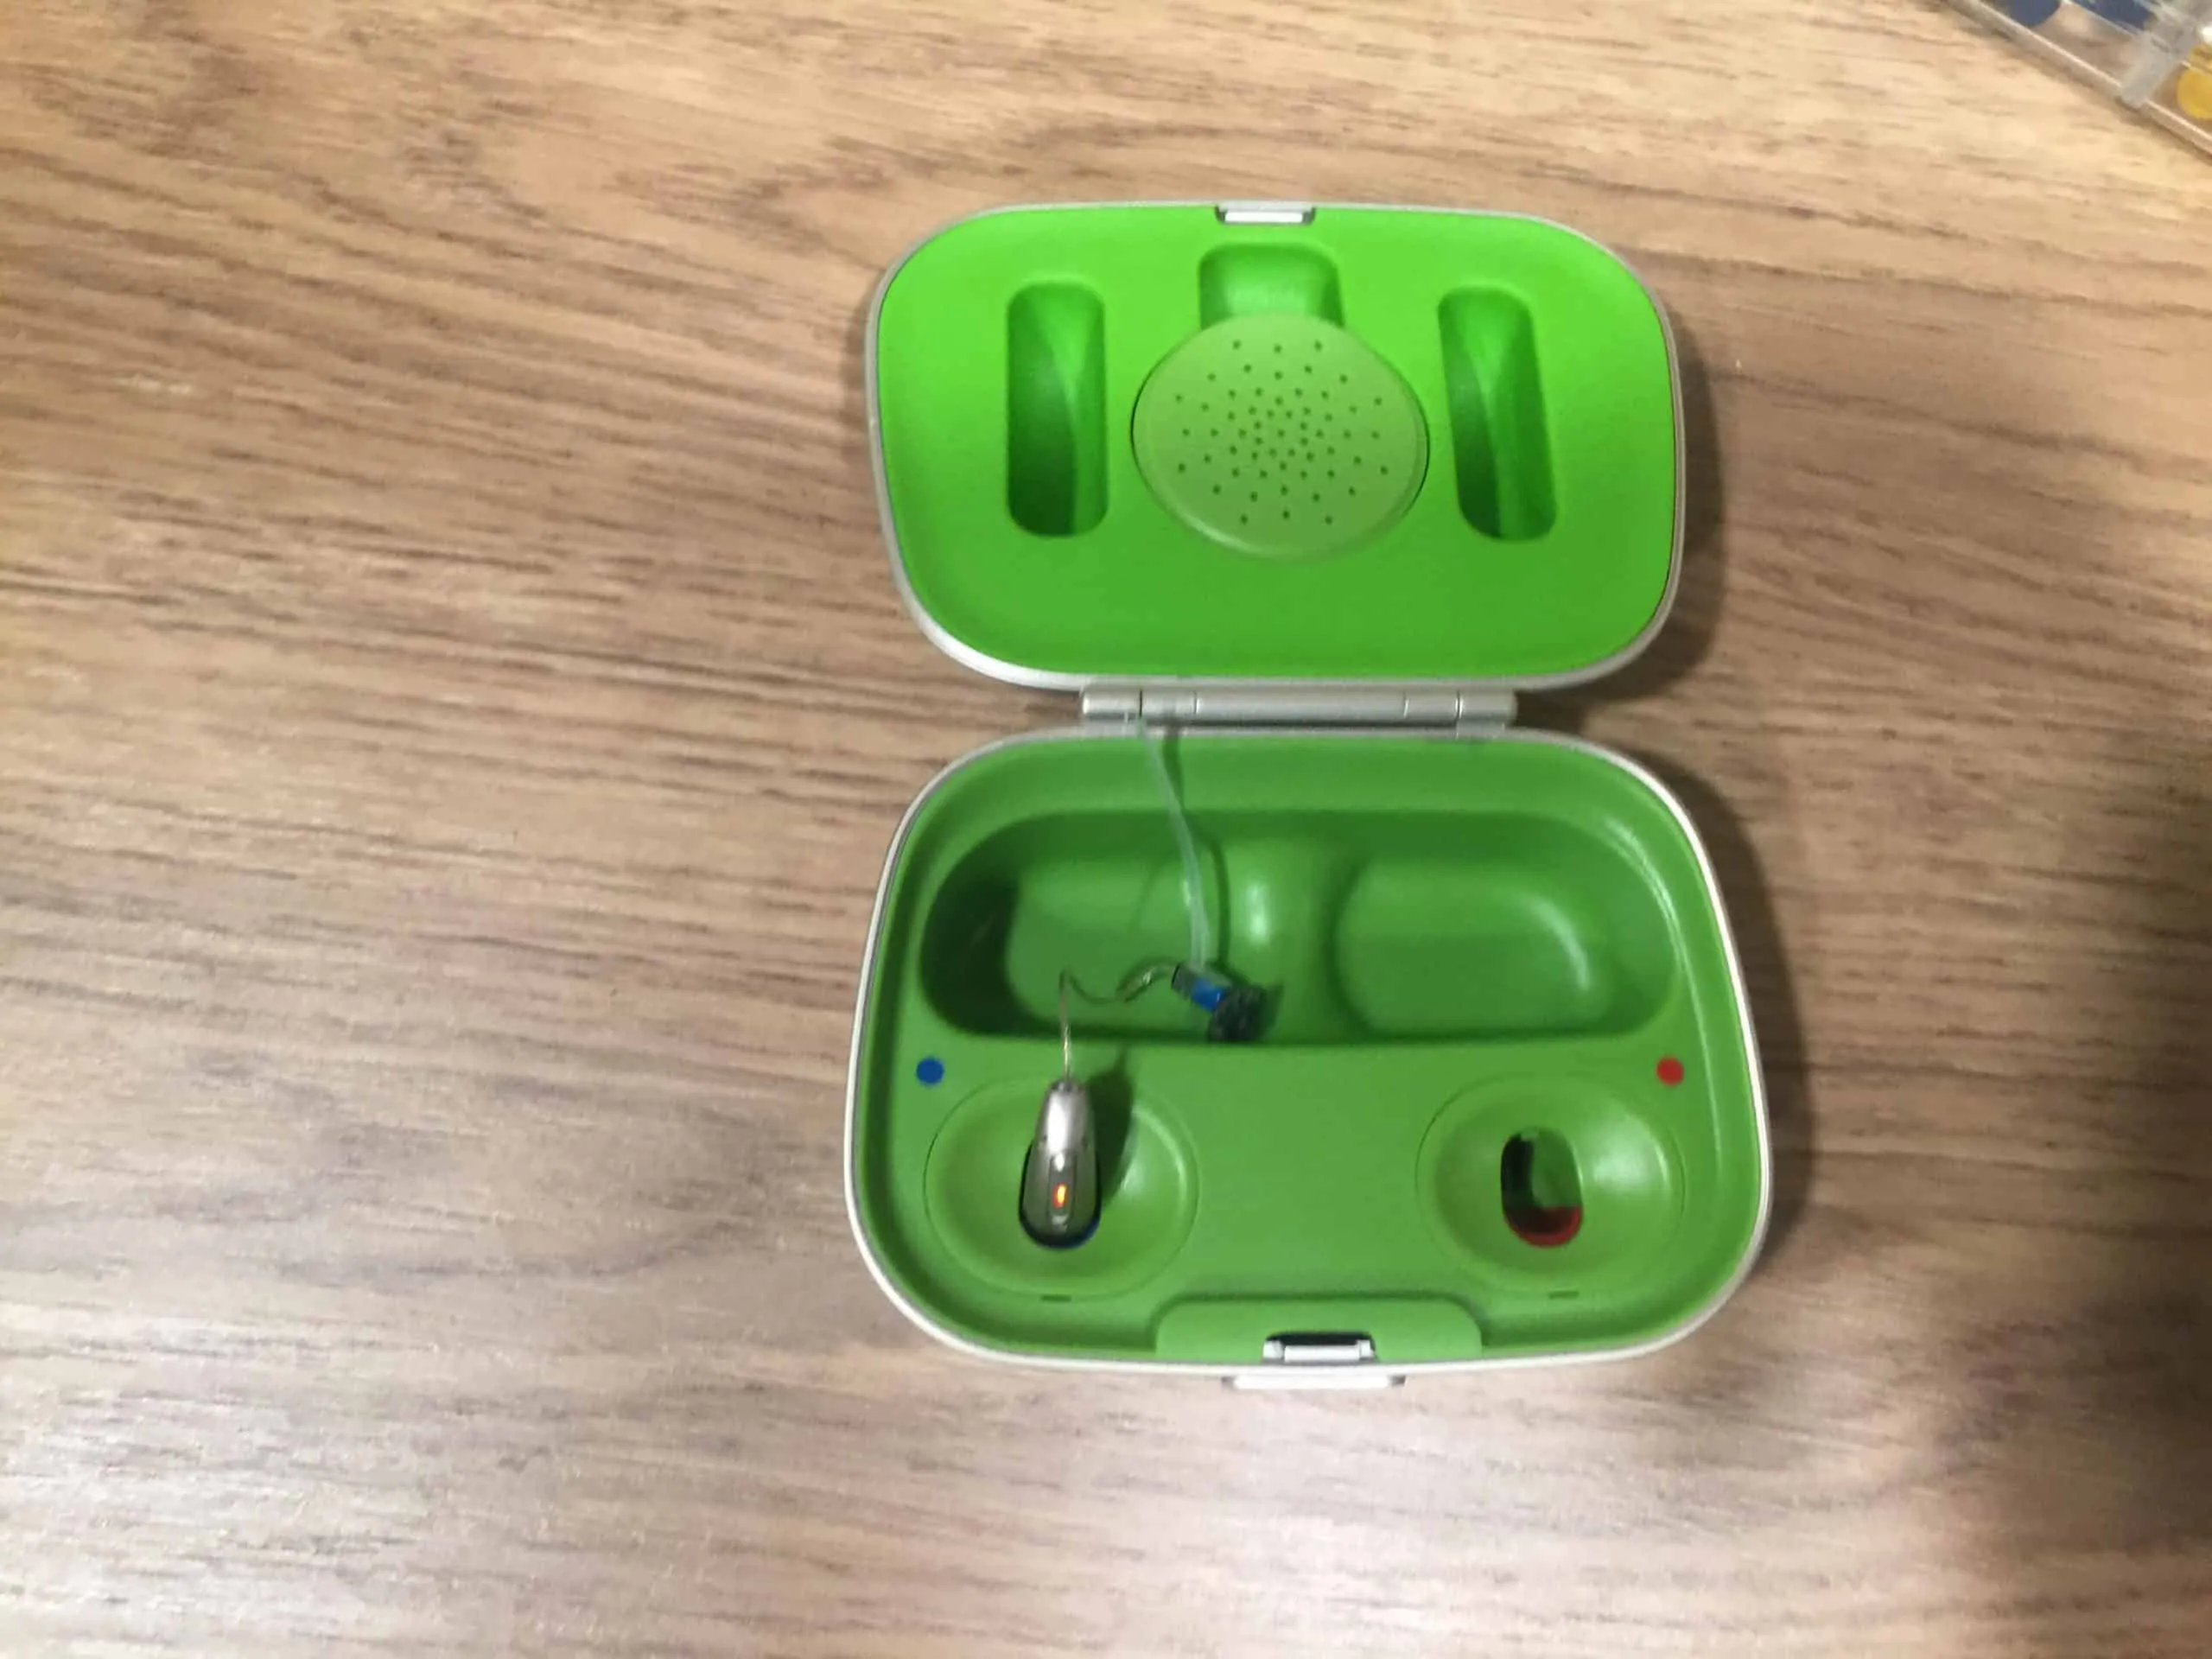 what color is light on phonak hearing aid in charger